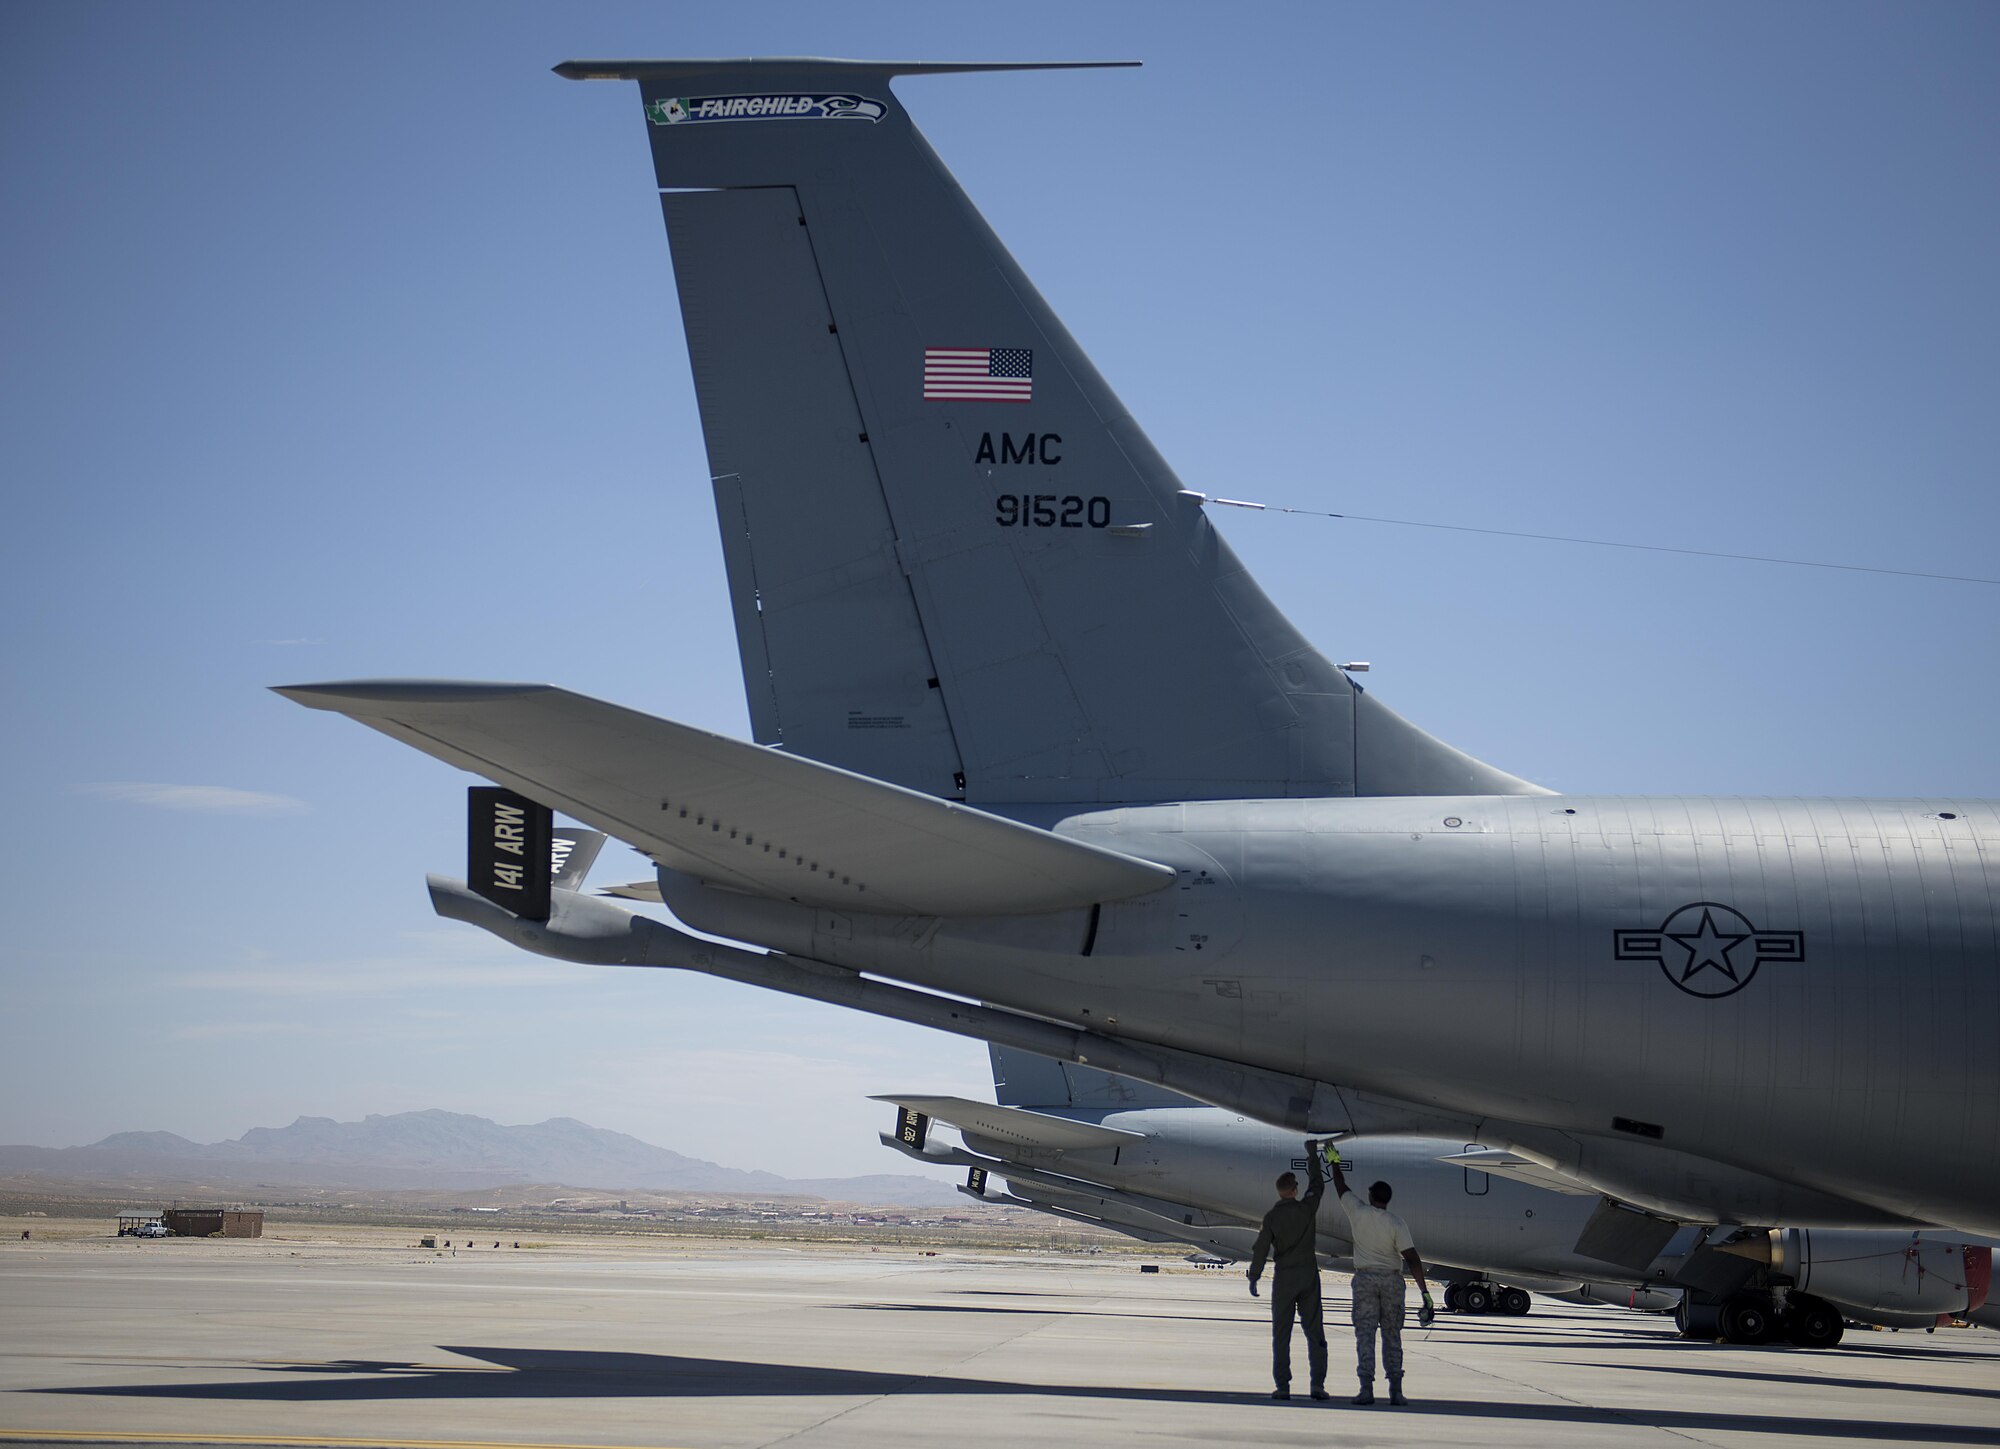 Capt. Dan Fenwick, a KC-135 Stratotanker pilot from MacDill Air Force Base, talks to Staff Sgt. Brandon Richardson as part of the pre-flight checks at Nellis Air Force Base, Nevada July 18, 2015 during exercise Red Flag. Red Flag 16-3 is one of four Red Flag exercises at Nellis--this edition of Red Flag focusing on multi-domain operations in air, space and cyberspace. (U.S. Air Force photo/Tech. Sgt. David Salanitri)